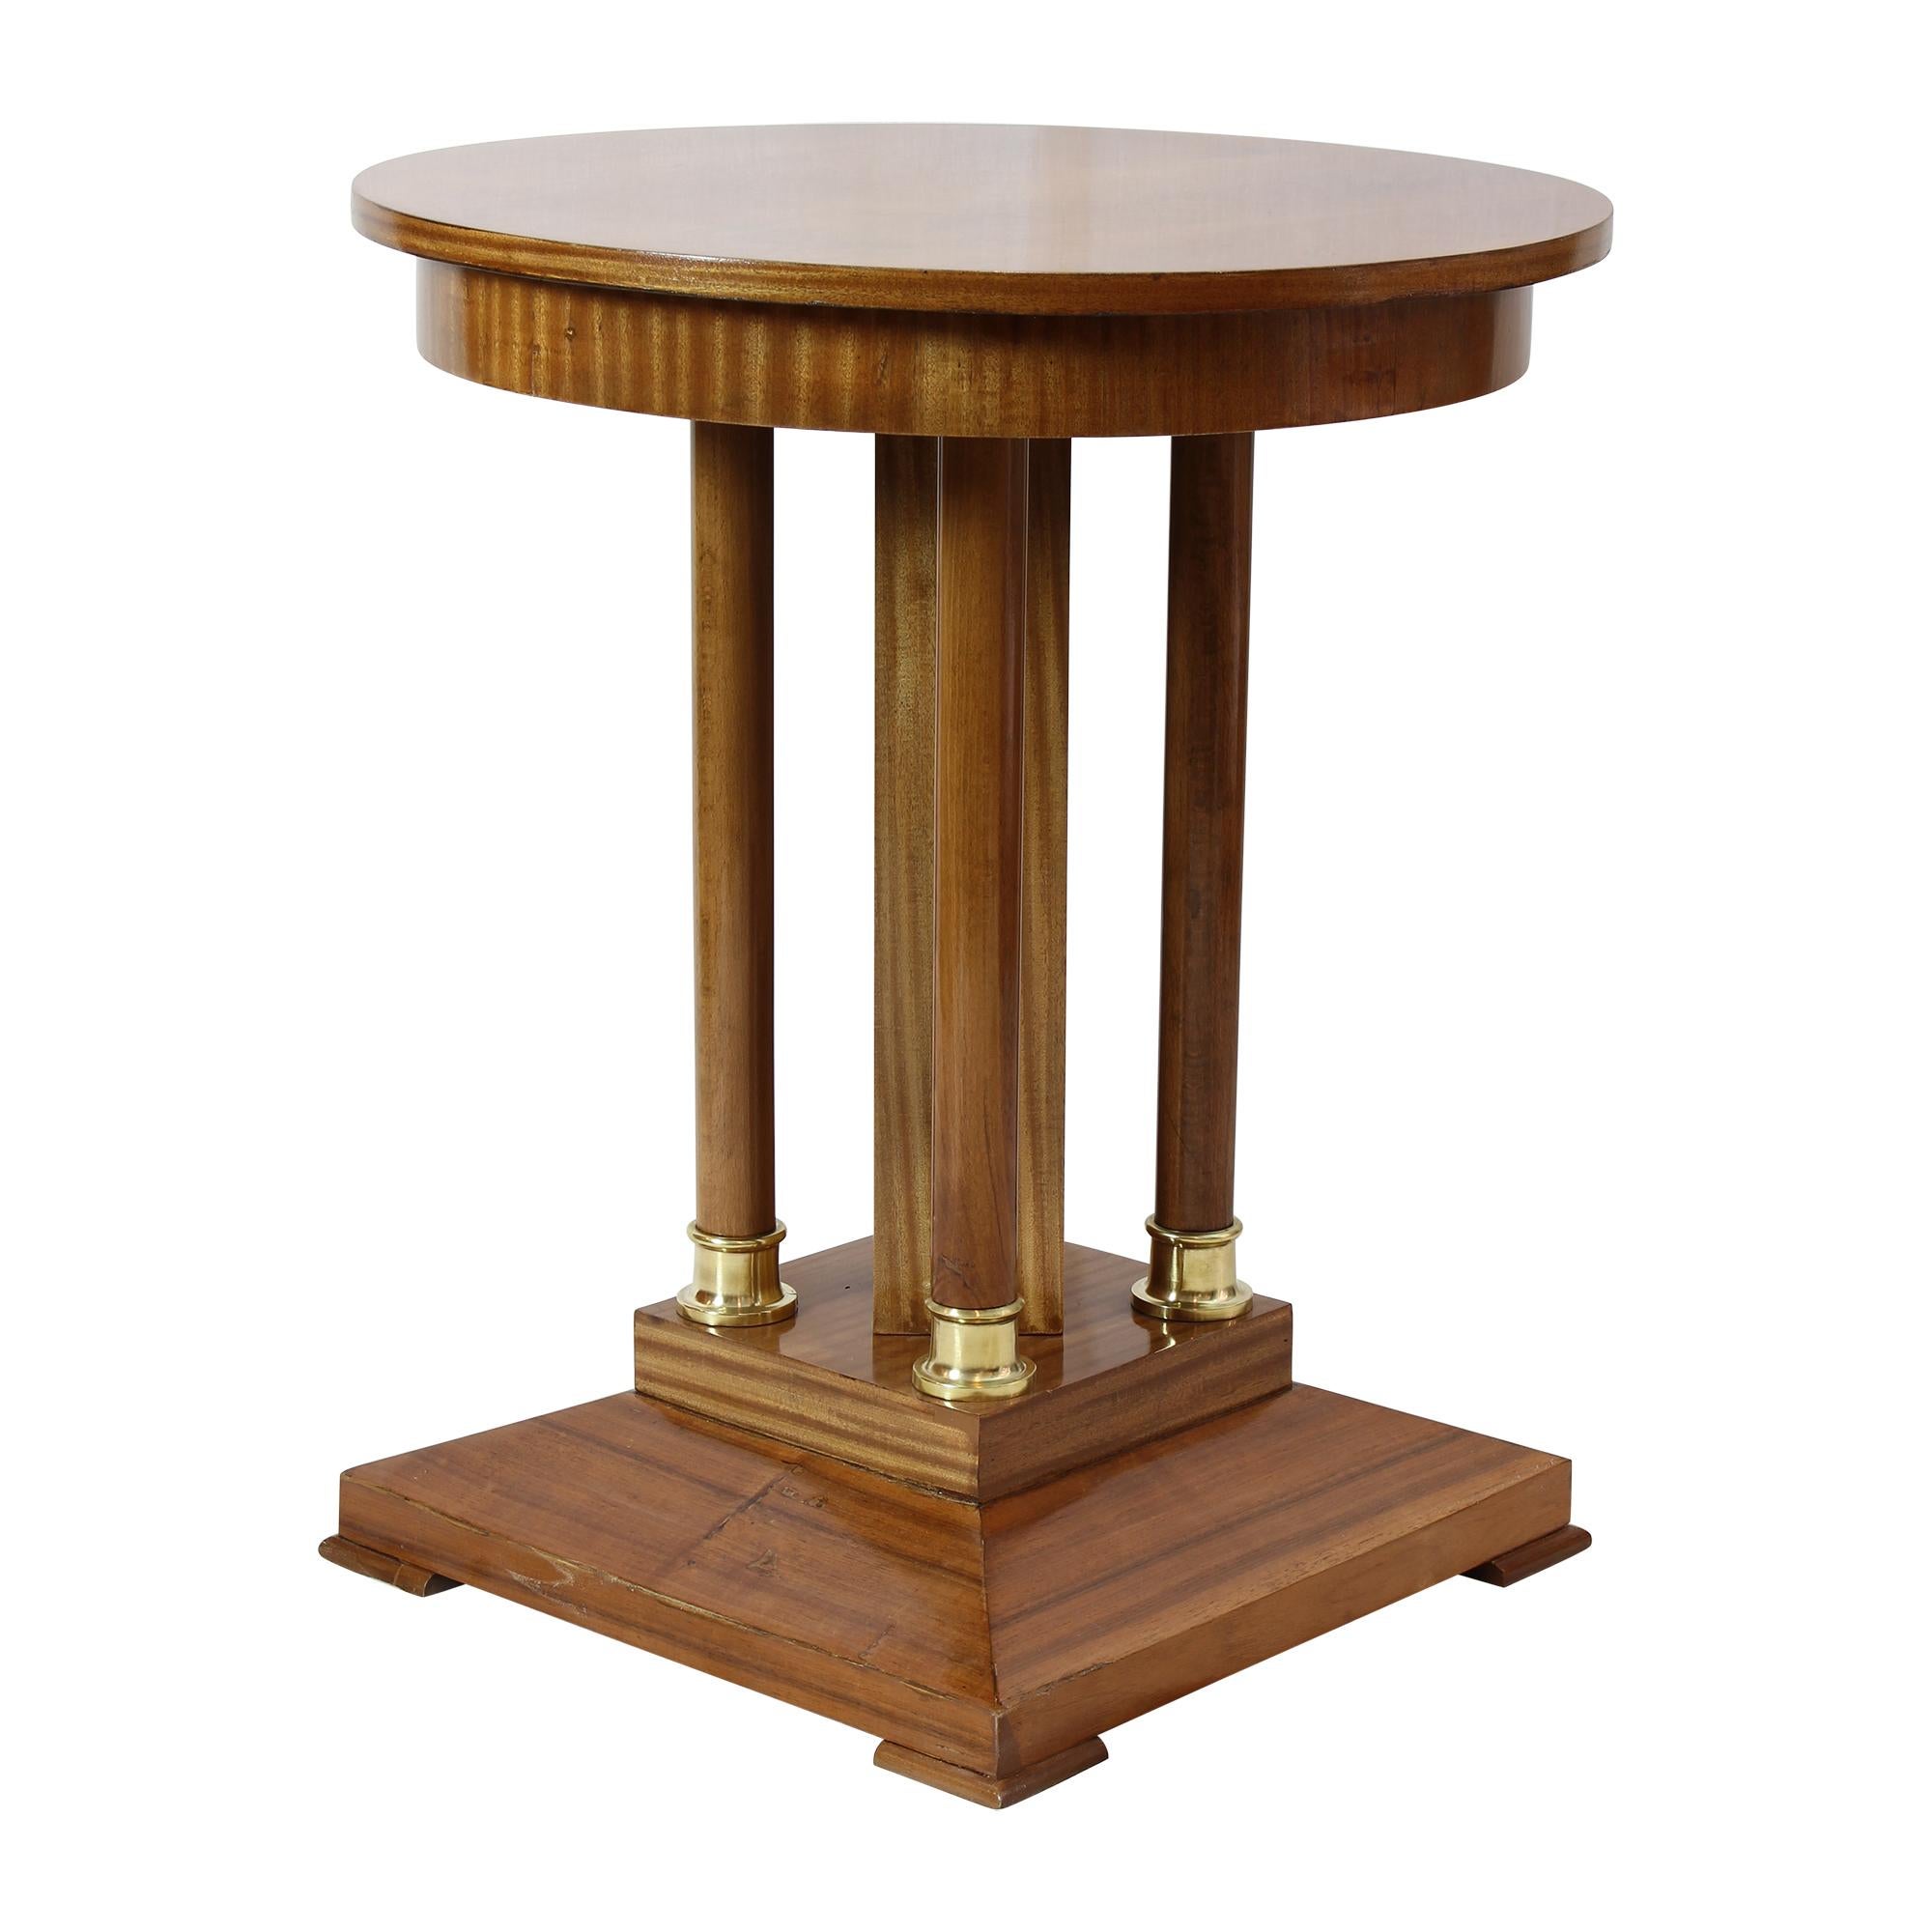 The side or salon table is made of walnut and has a beautiful Art Nouveau design, dates from the Art Nouveau period circa 1900. The columns are with brass base. In very good restored condition. The foot has the dimensions 50 x 50 cm.